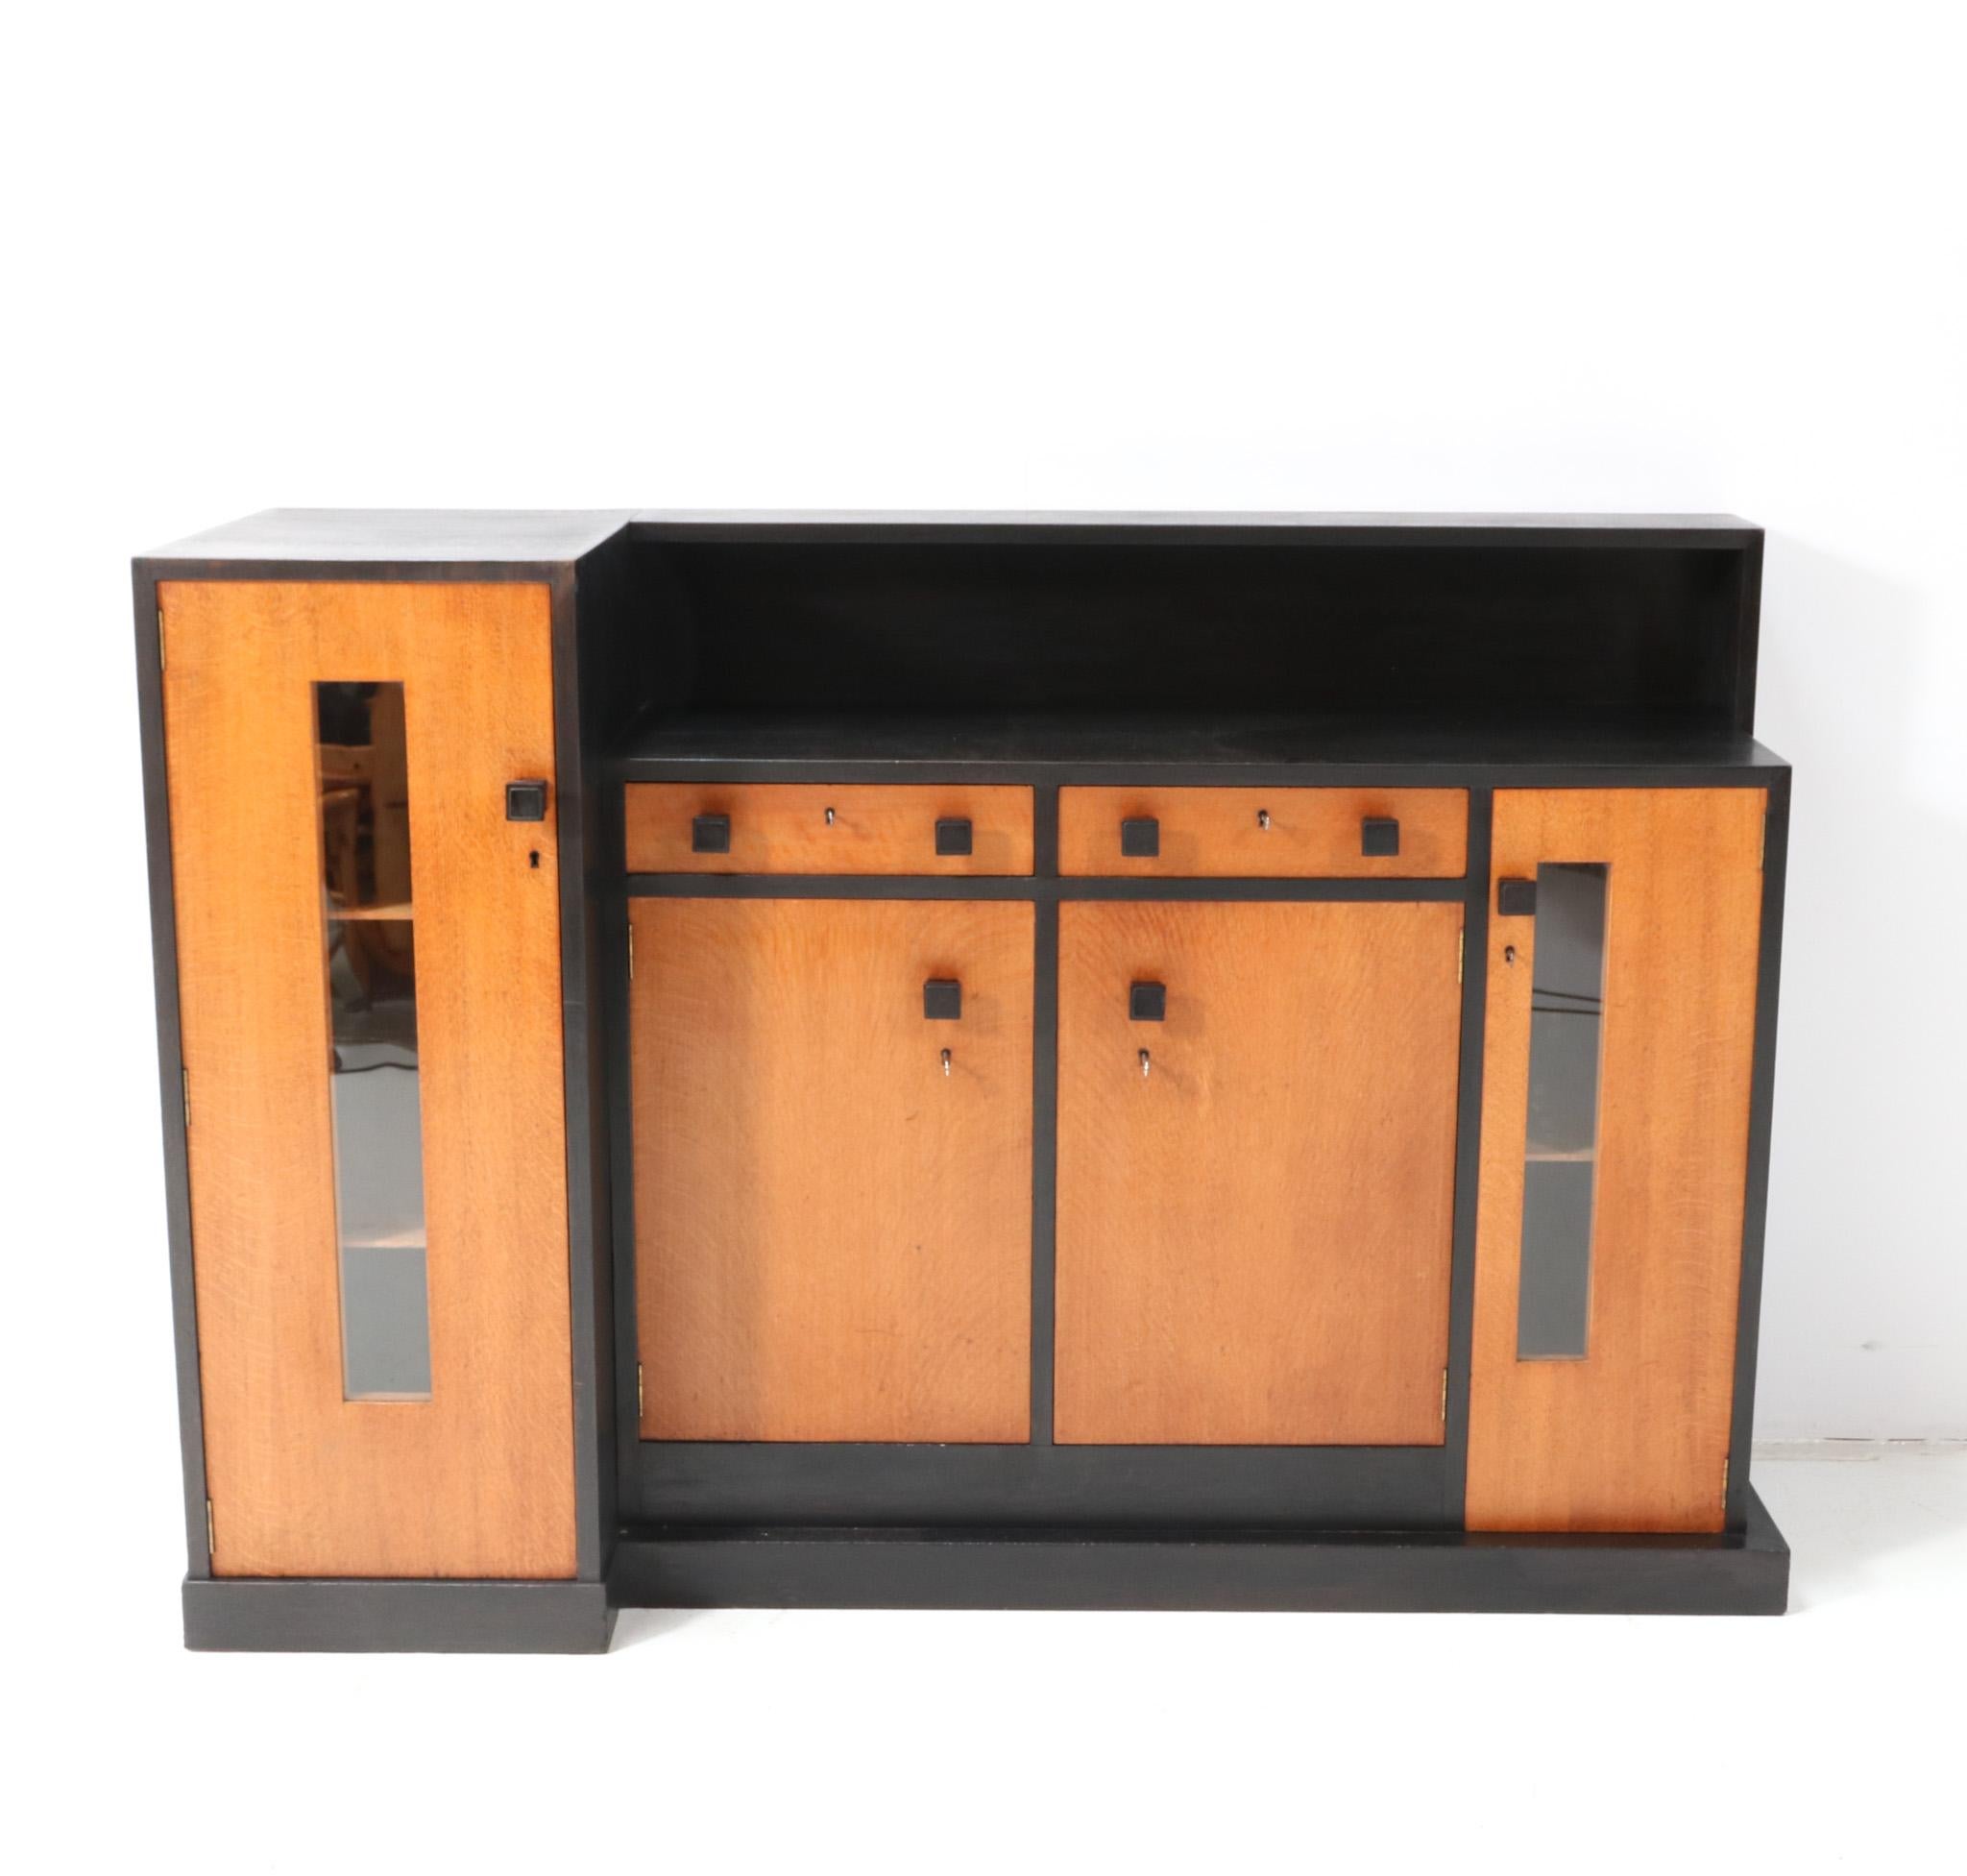 Magnificent and ultra rare Modernist Art Deco sideboard or credenza.
Design by Cor Alons and executed by Fa. Winterkamp & Van Putten in 1927.
Striking Dutch design from the 1920s.
Solid oak and black lacquered base with original black lacquered